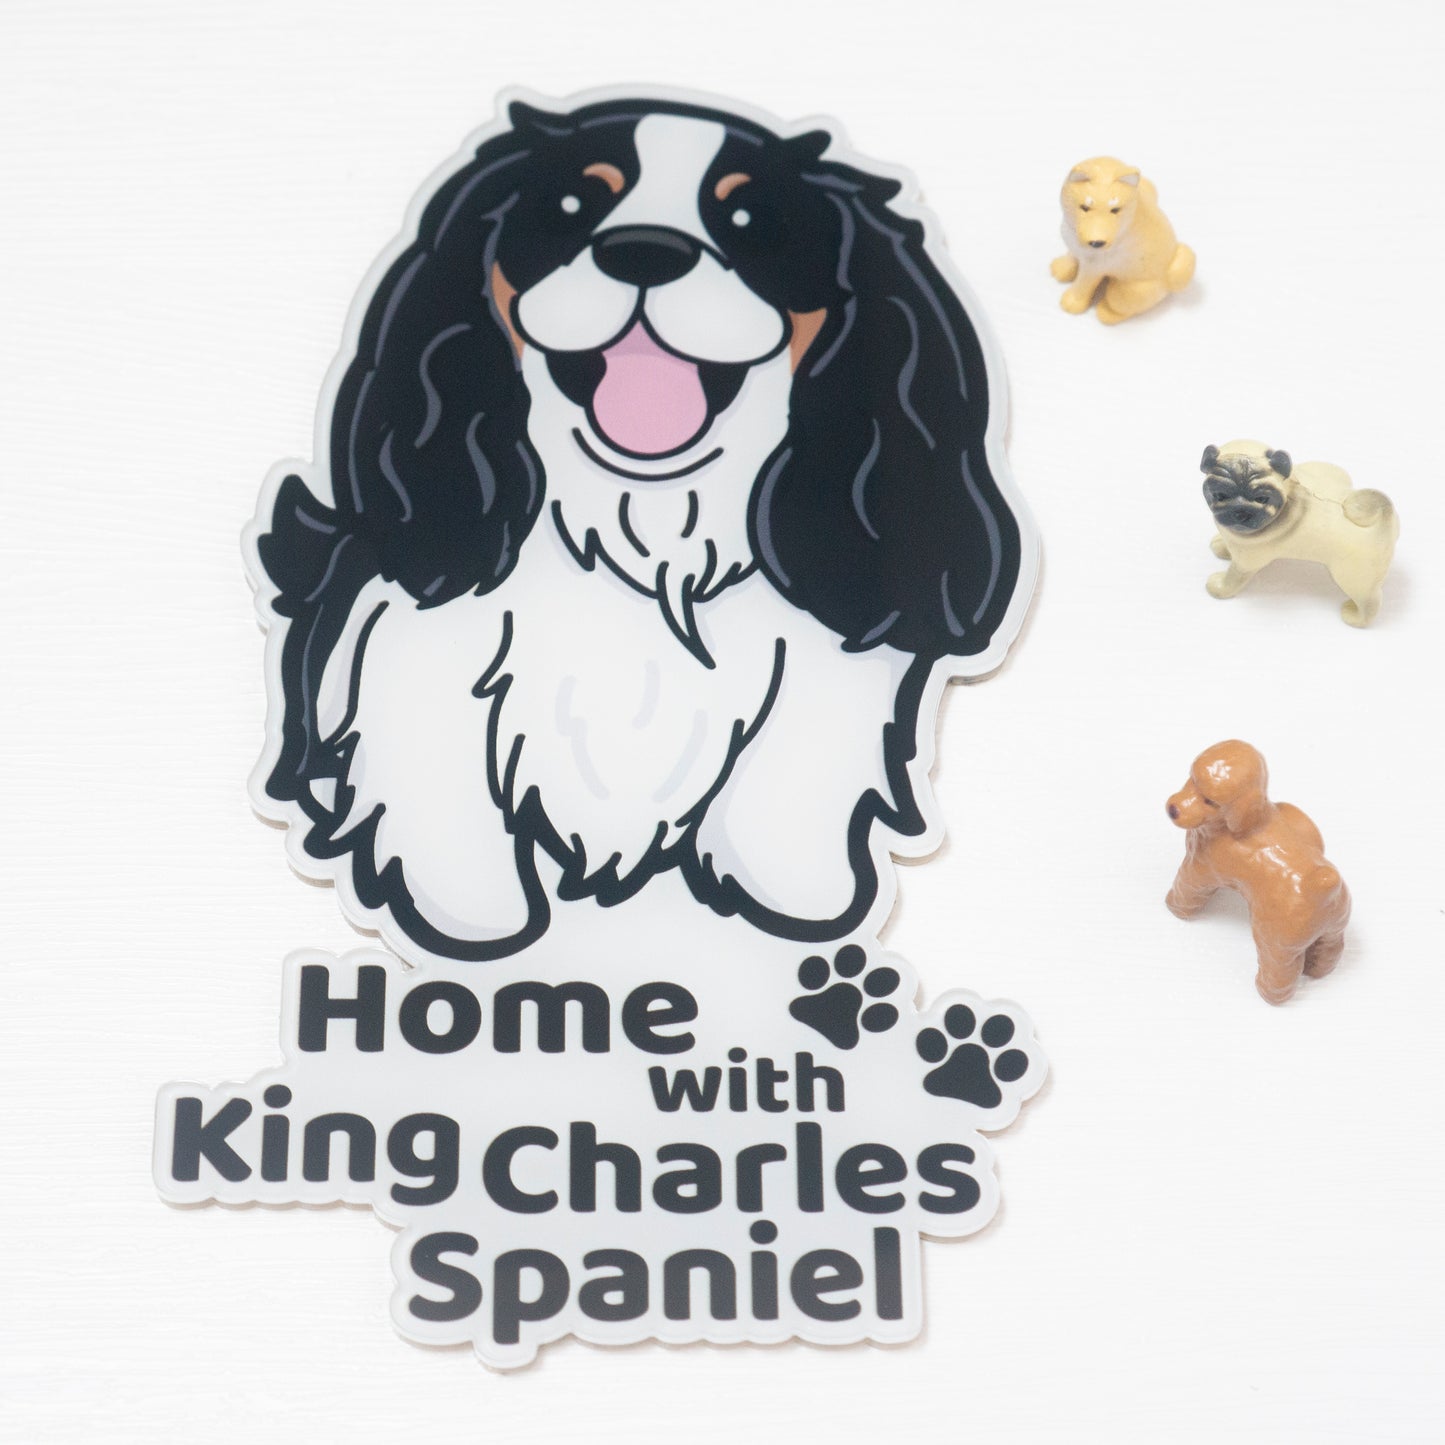 Home with King Charles King Charles Spaniel house number